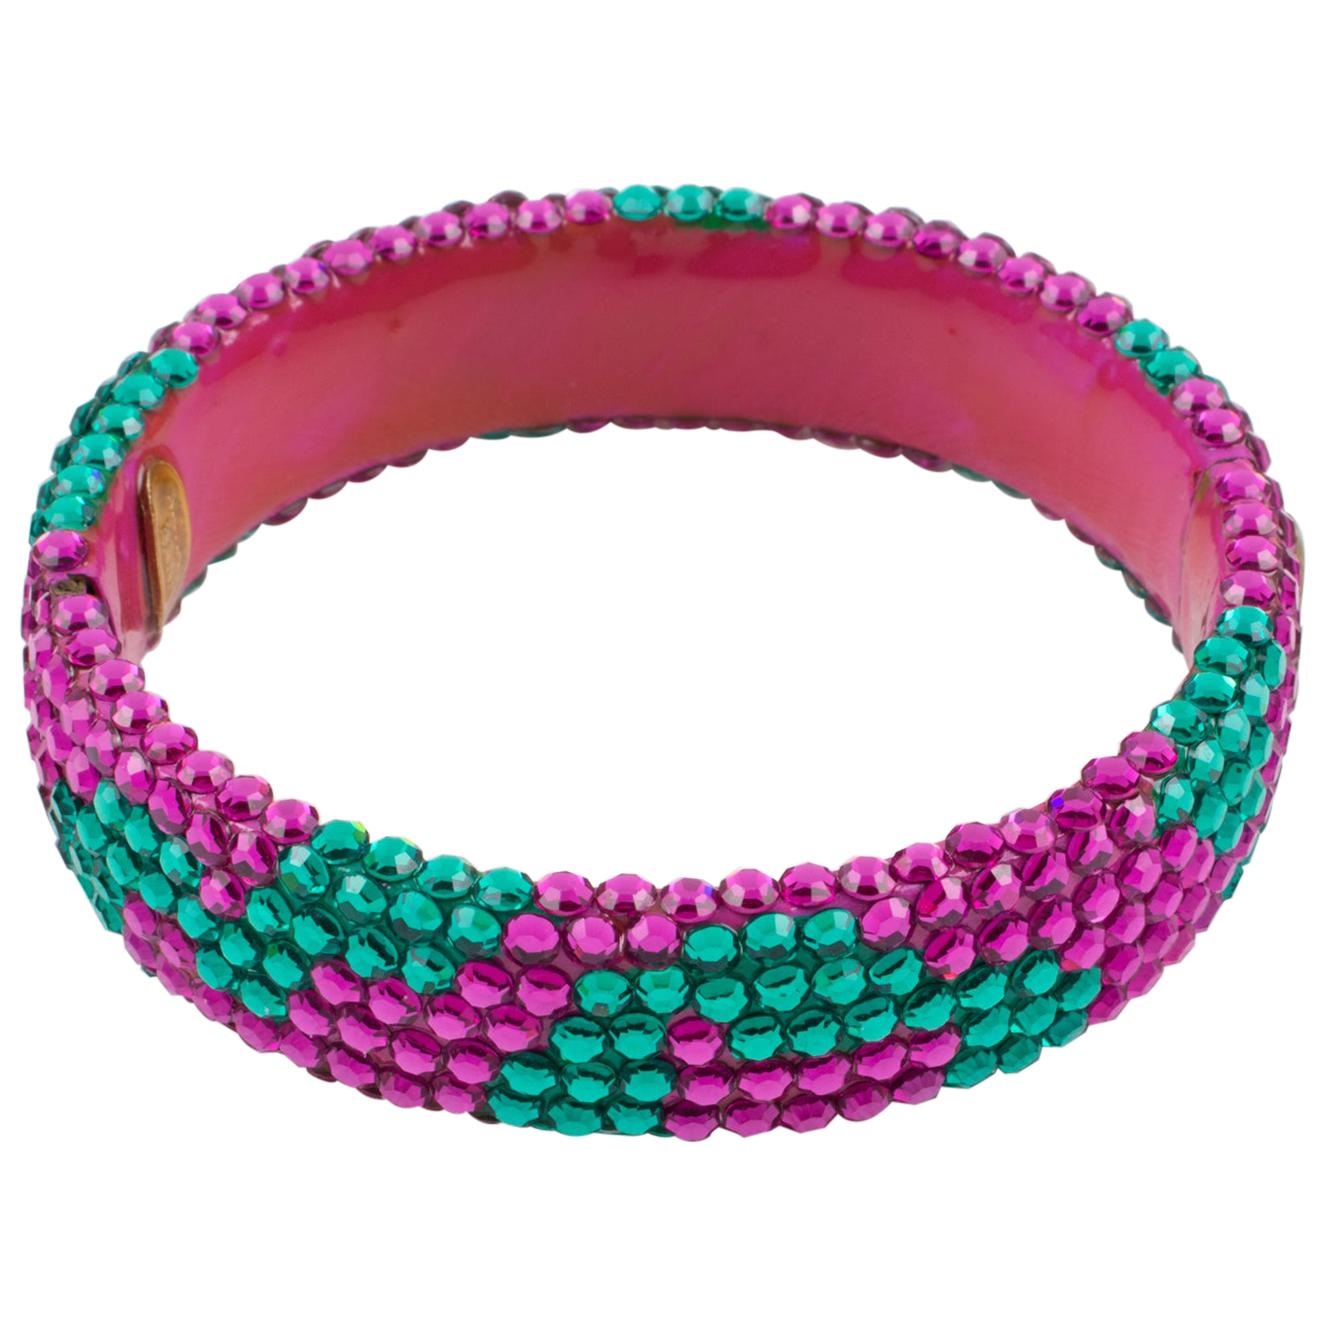 Richard Kerr designed this beautiful statement clamper bracelet in the 1980s. The bangle is made of his signature pave rhinestones and features a large band shape covered with bi-color crystal rhinestones. The piece boasts bright colors of fuchsia